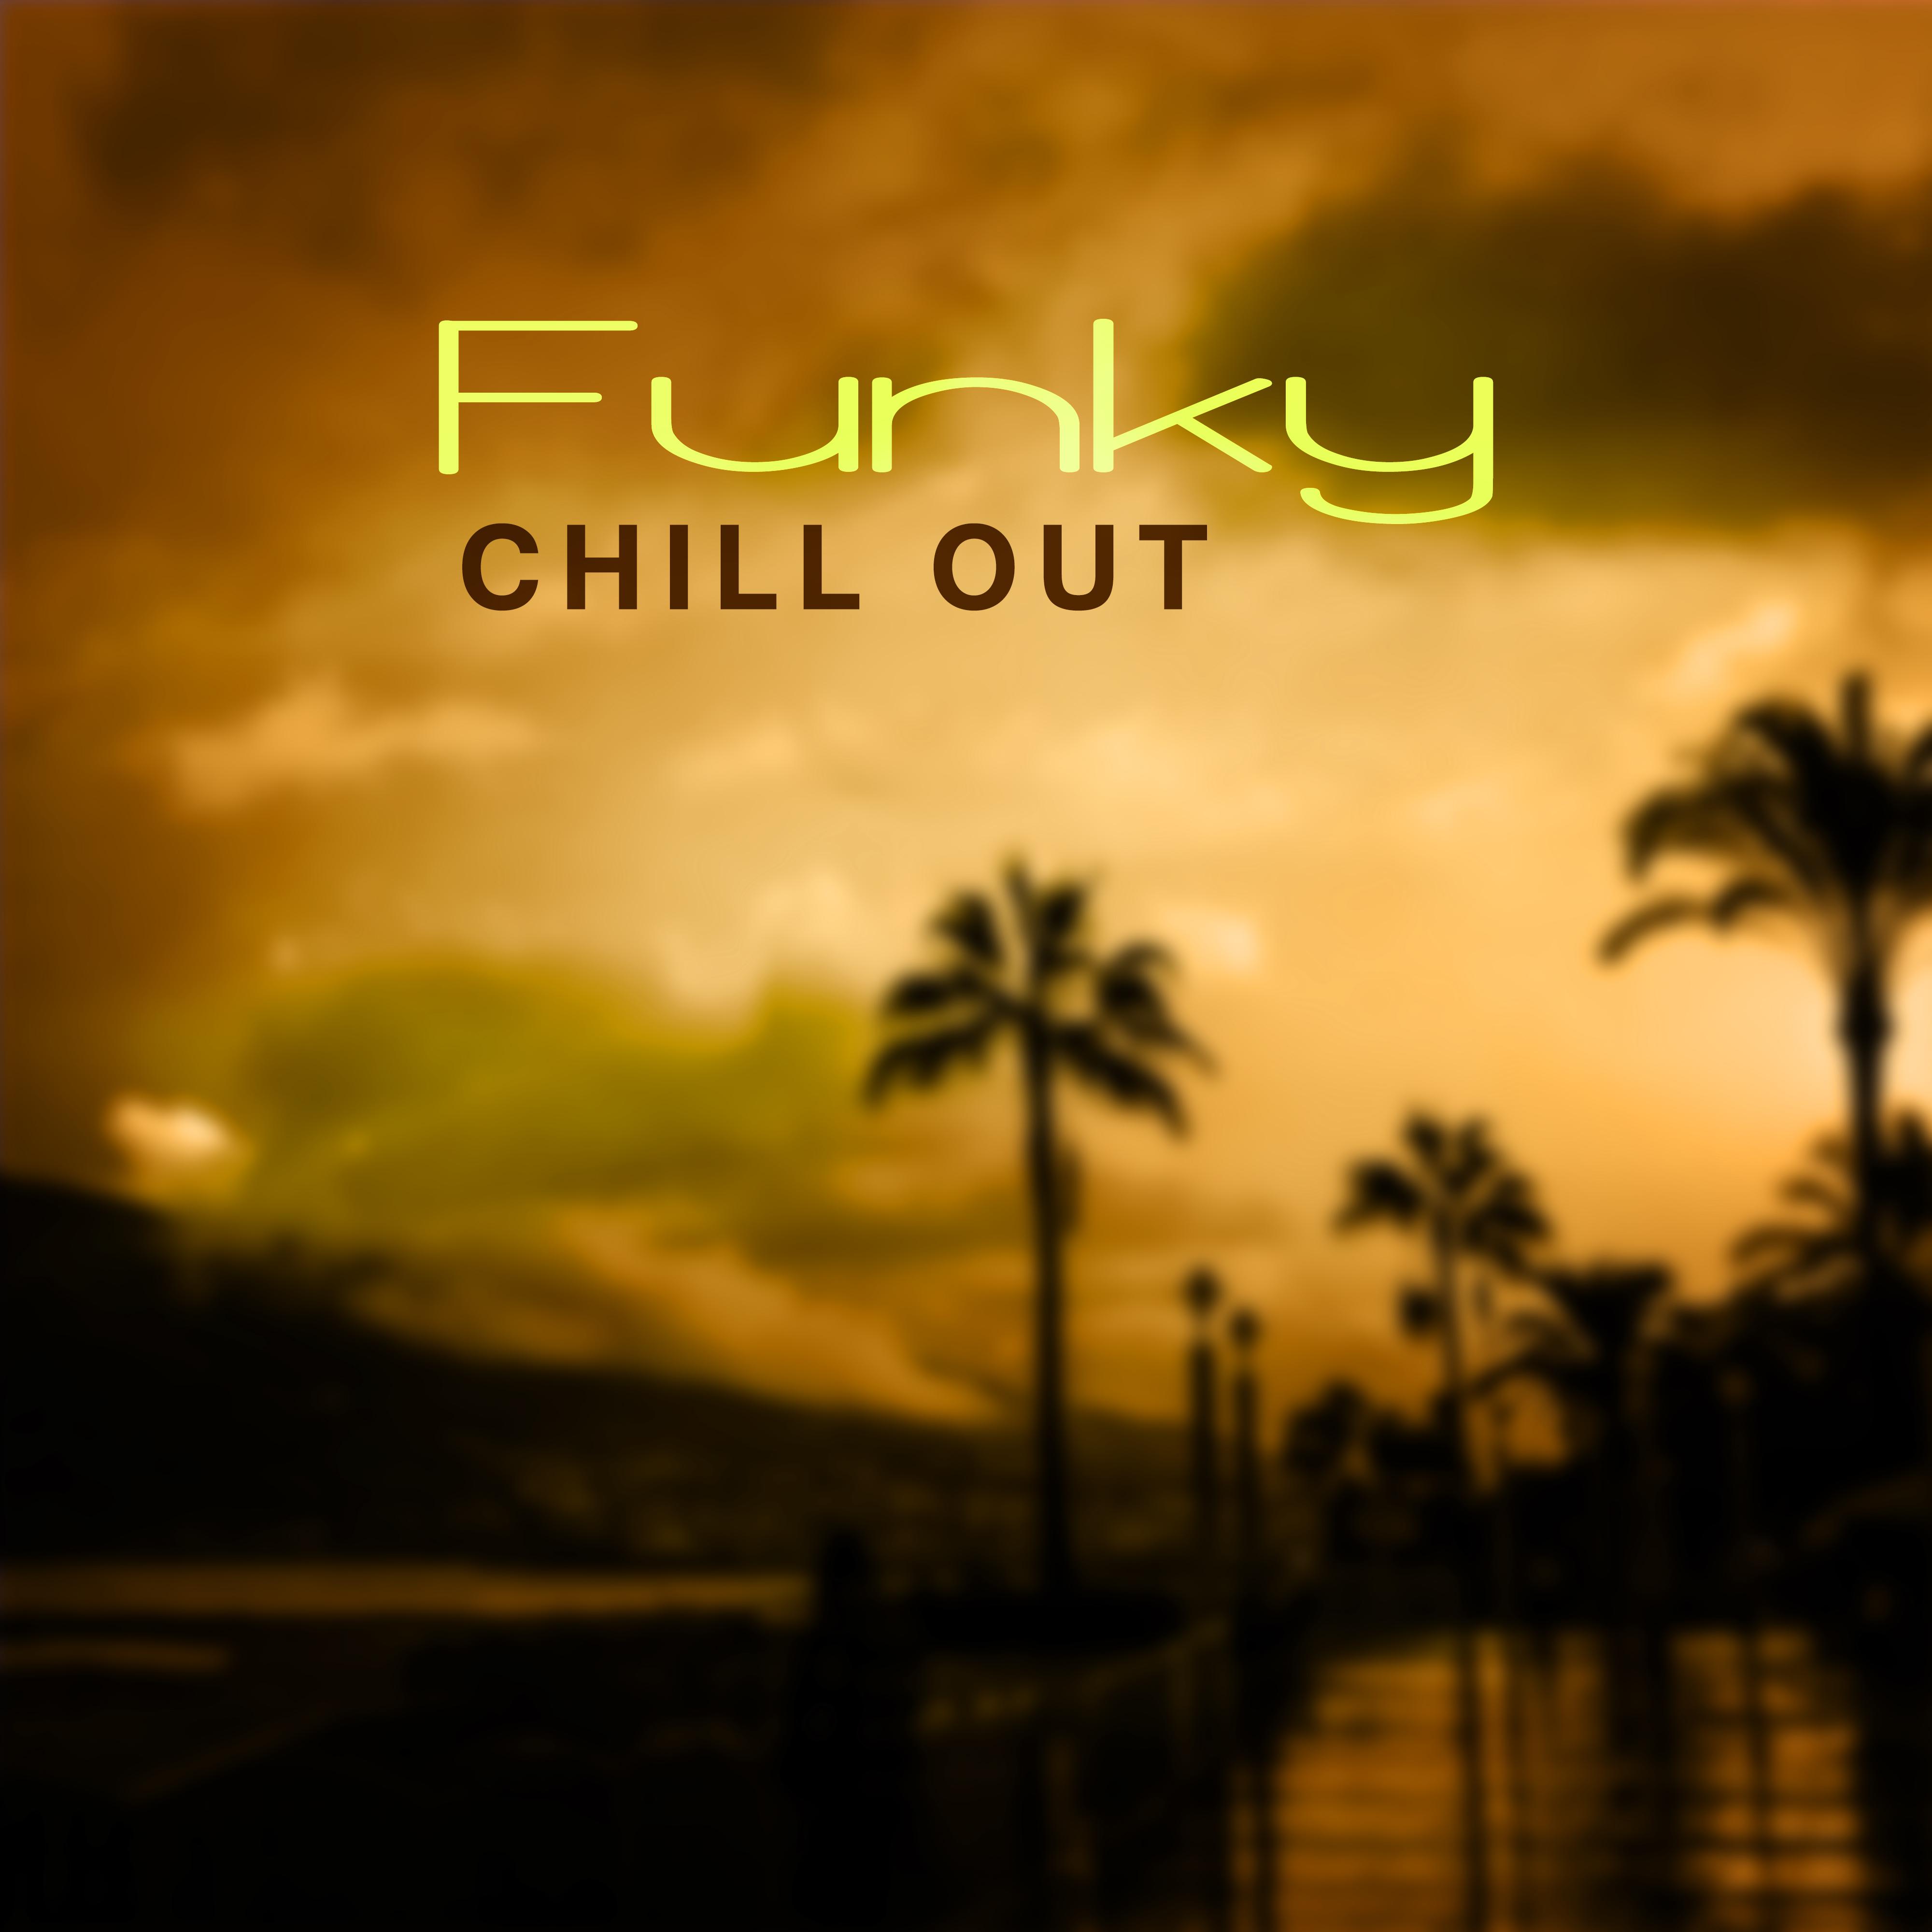 Funky Chillout – Relax & Chillin Morning, Chill Out Music 2017, The Best of Chill Out Beats, Mr Chillout Lounge